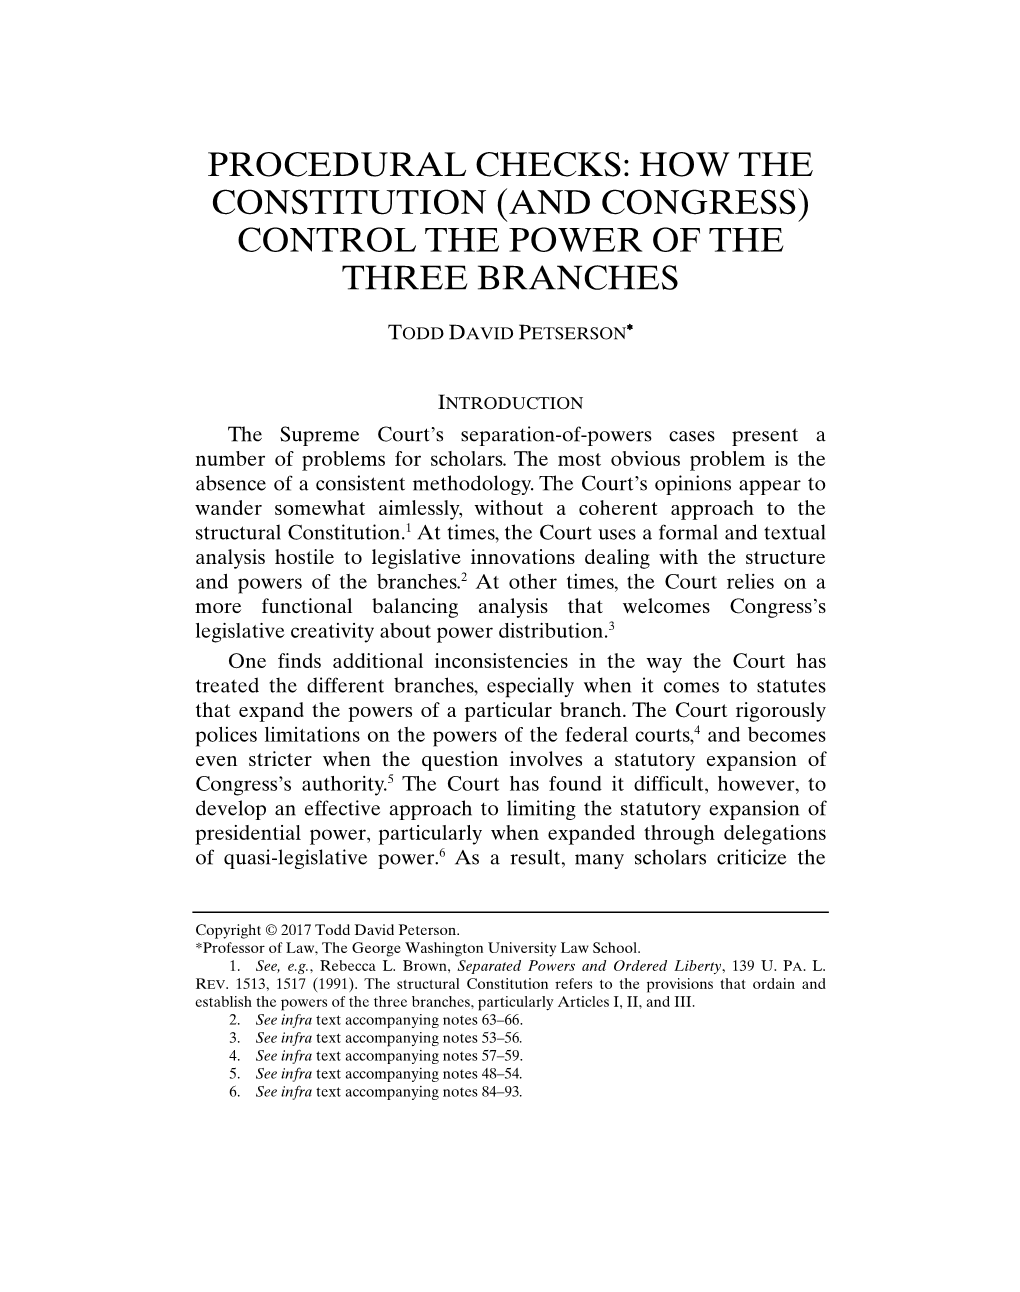 Procedural Checks: How the Constitution (And Congress) Control the Power of the Three Branches